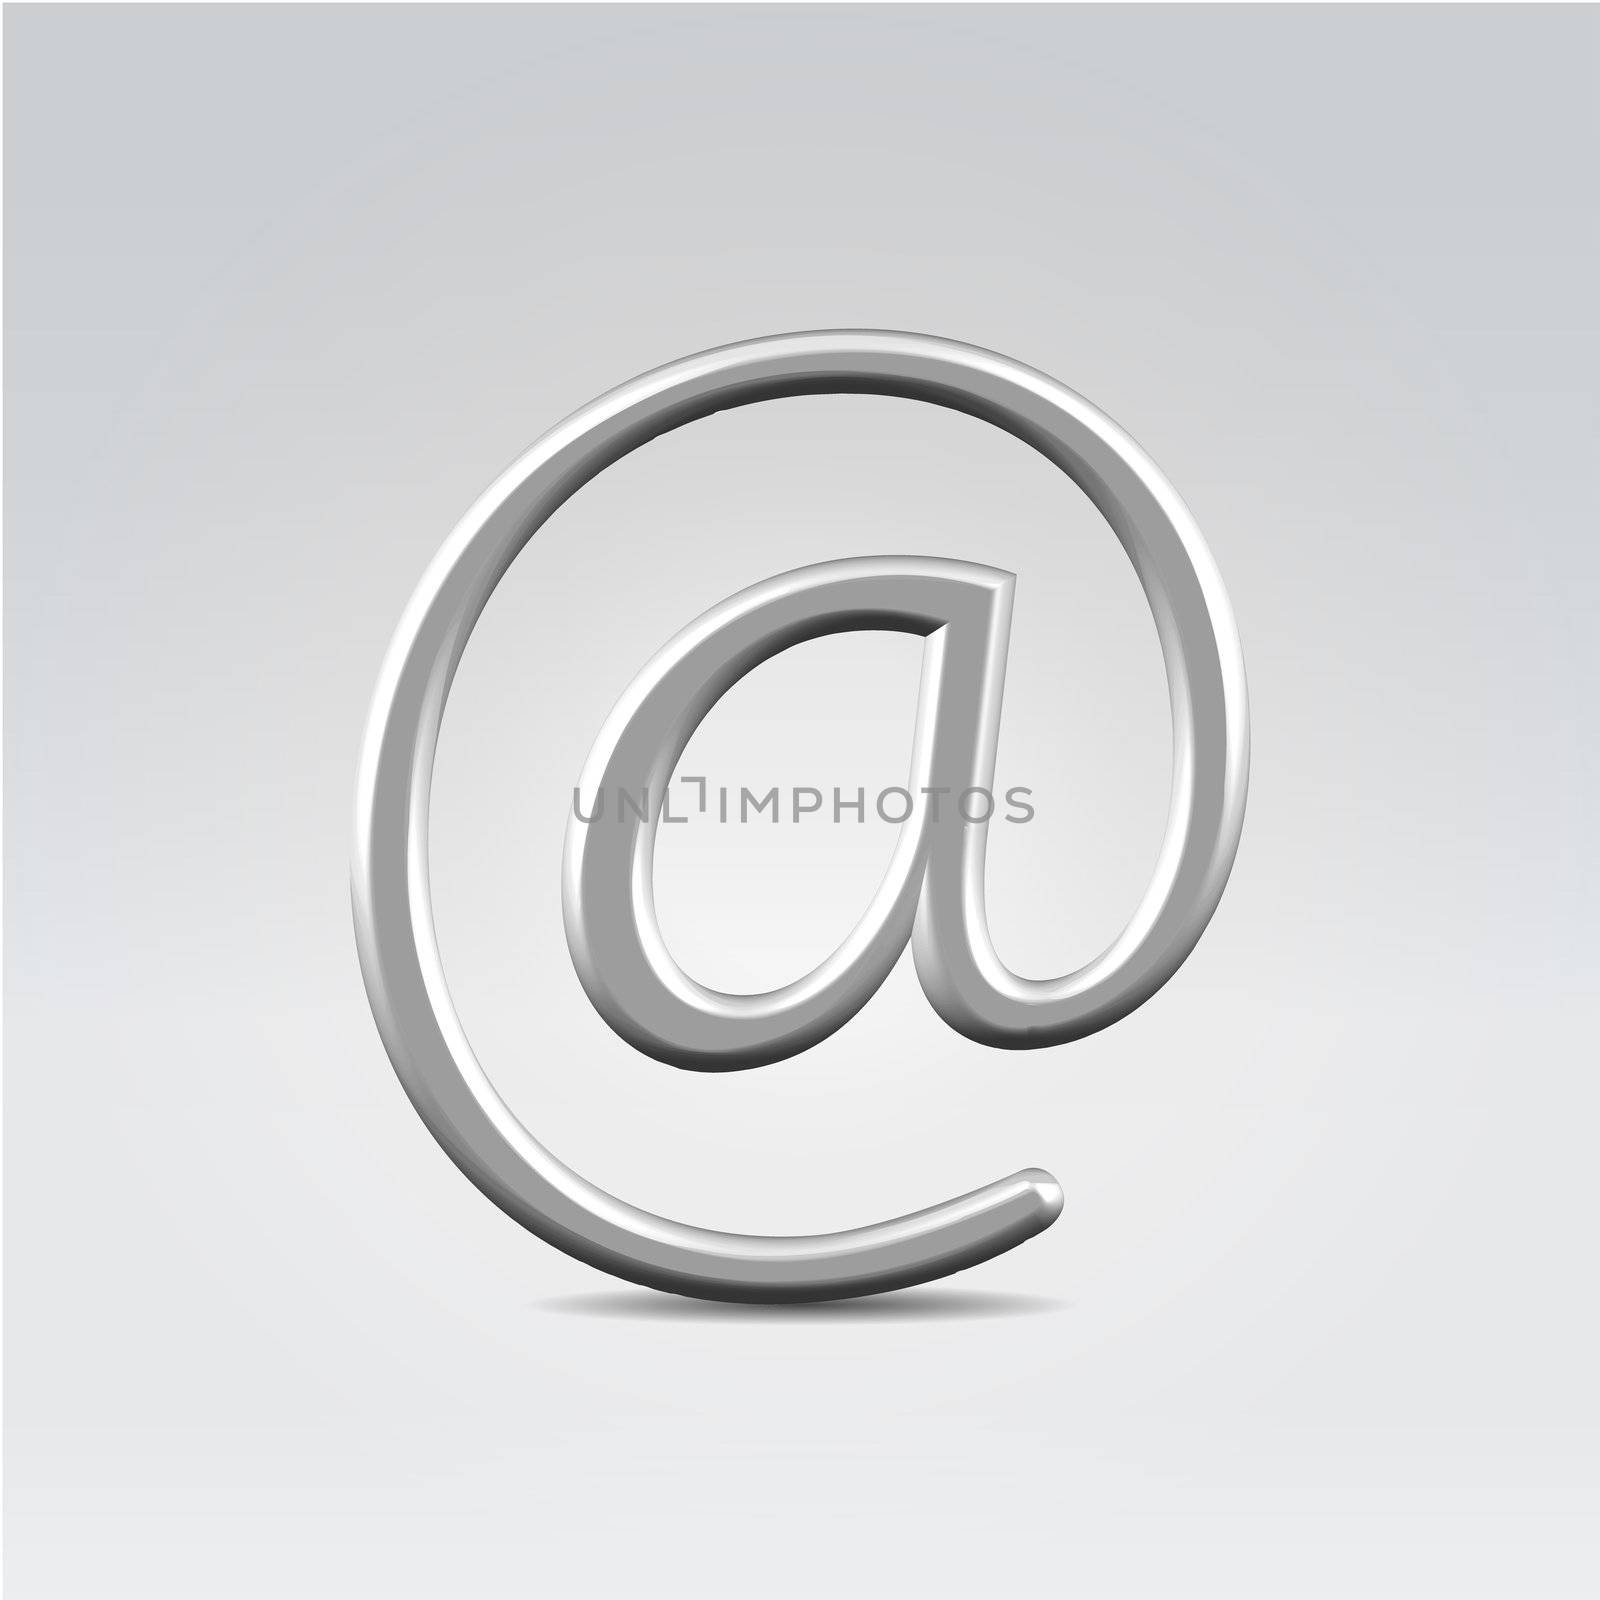 Silver shining metallic email symbol by pics4sale